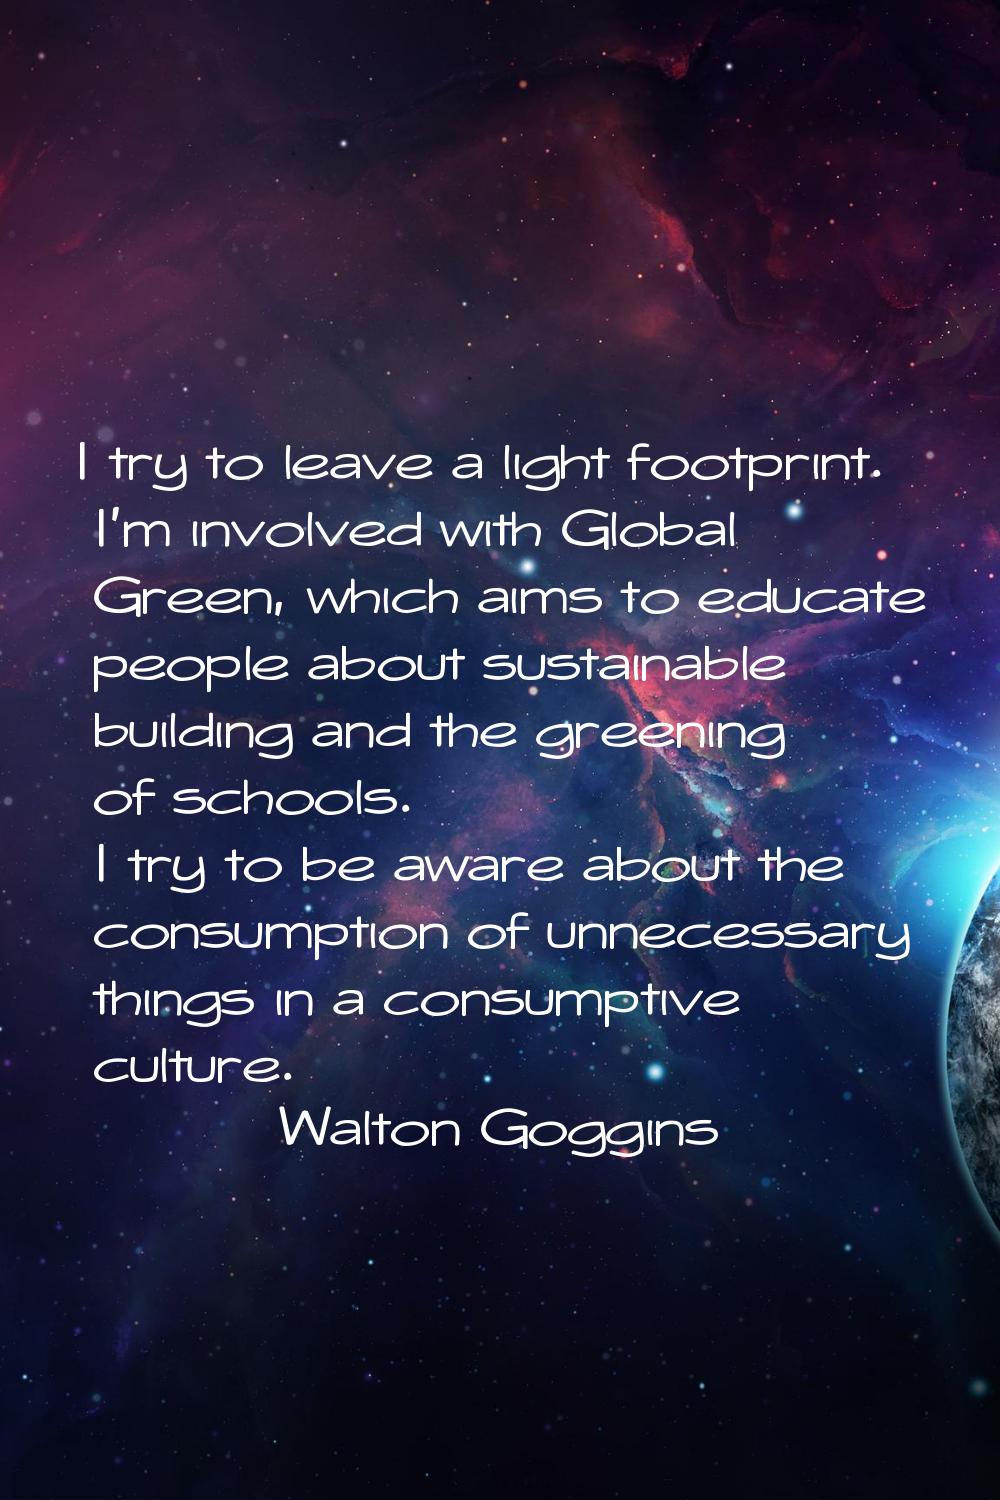 I try to leave a light footprint. I'm involved with Global Green, which aims to educate people abou